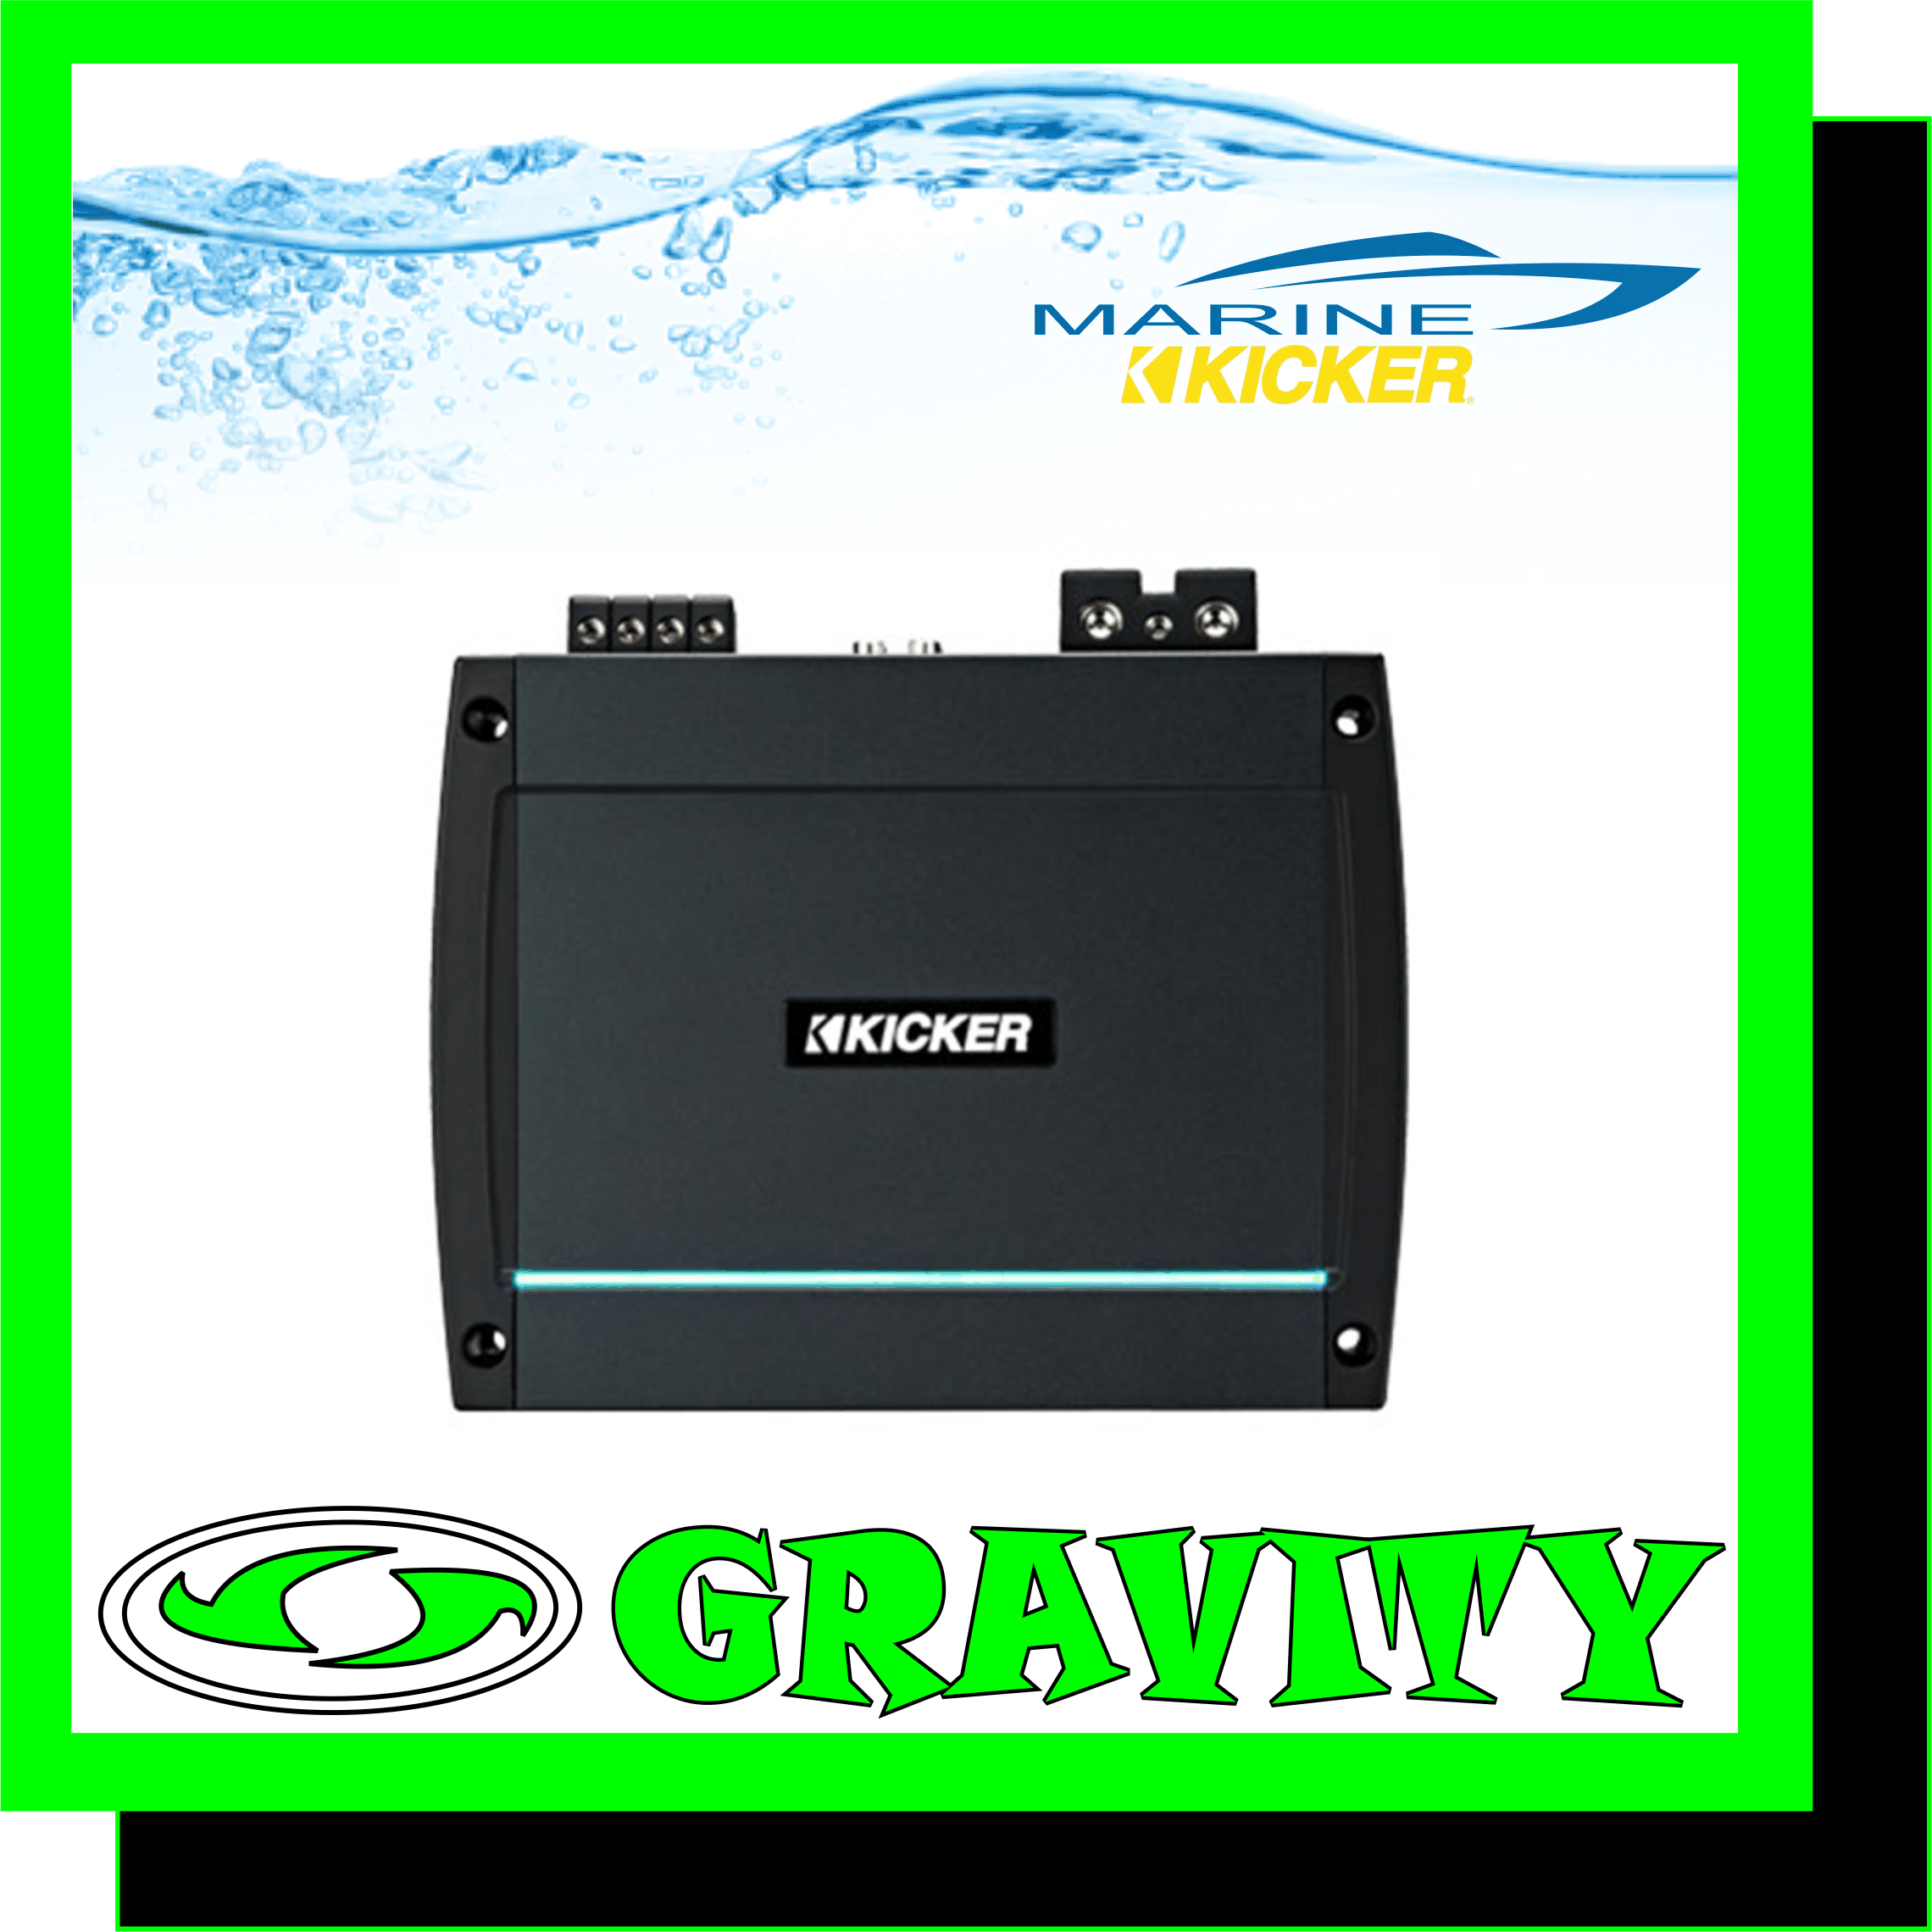 Kicker 44KXMA12001 Mono 1200-watt Class-D Marine Amplifier  The KXM 1200-watt mono amplifier uses Class D technology for huge power in a small chassis. KickEQ+? provides an enormous 18dB of variable bass boost, while a powerful 24dB crossover and subsonic filter to give you the acoustic control to quickly perfect your sound.  A wireless controller is also included for perfecting your sound on the fly. Monitor and adjust gain, bass boost, clipping and more without leaving the driver?s seat!  Features:  Class D Power Plant One-Ohm Stable SHOCwave? Bass Restoration Processor KXARC Wireless Remote Included Gain Control With ?Optimal Input? Indicator Variable 24dB Subsonic Filter FIT2? (Fail-Safe Integration Technology) Circuitry Variable 24dB Crossover DSP-Controlled Preamp KickEQ+? 18dB Variable Bass Boost ABYC/NMMA Compliant Power Terminals Conformal-Coated Circuit Boards Easy Access to Settings behind Gasket-Sealed Cover Panel Black Anodized Aluminum Chassis Top-Mounted Teal LED Light Pipe Stainless Steel Mounting Hardware Included KXMA1200.1 Mono 1200-watt Class-D Marine Amplifier:  Class D Power Plant One-Ohm Stable SHOCwave? Bass Restoration Processor KXARC Wireless Remote Included Gain Control With ?Optimal Input? Indicator Variable 24dB Subsonic Filter FIT2? (Fail-Safe Integration Technology) Circuitry Variable 24dB Crossover DSP-Controlled Preamp KickEQ ? 18dB Variable Bass Boost ABYC/NMMA Compliant Power Terminals Conformal-Coated Circuit Boards Easy Access to Settings behind Gasket-Sealed Cover Panel Black Anodized Aluminum Chassis Top-Mounted Teal LED Light Pipe Stainless Steel Mounting Hardware Included  RMS Power [Watts] @ 14.4V, 4Ohm mono, = 1% THD N : 600 x 1 @ 14.4V, 2Ohm mono, = 1% THD N : 1200 x 1 @ 14.4V, 1Ohm mono, = 1% THD N : /- 10%   KXMA1200.1 Mono 1200-watt Class-D Marine Amplifier The KXM 1200-watt mono amplifier uses Class D technology for huge power in a small chassis. KickEQ ? provides an enormous 18dB of variable bass boost, while a powerful 24dB crossover and subsonic filter to give you the acoustic control to quickly perfect your sound. A wireless controller is also included for perfecting your sound on the fly. Monitor and adjust gain, bass boost, clipping and more without leaving the driver's seat! KXM Amplifiers are built for fun, no matter where you go. Power, speaker and input connections are gasket-sealed, as is the control cover hiding the settings, creating a water-resistant barrier to key components.  